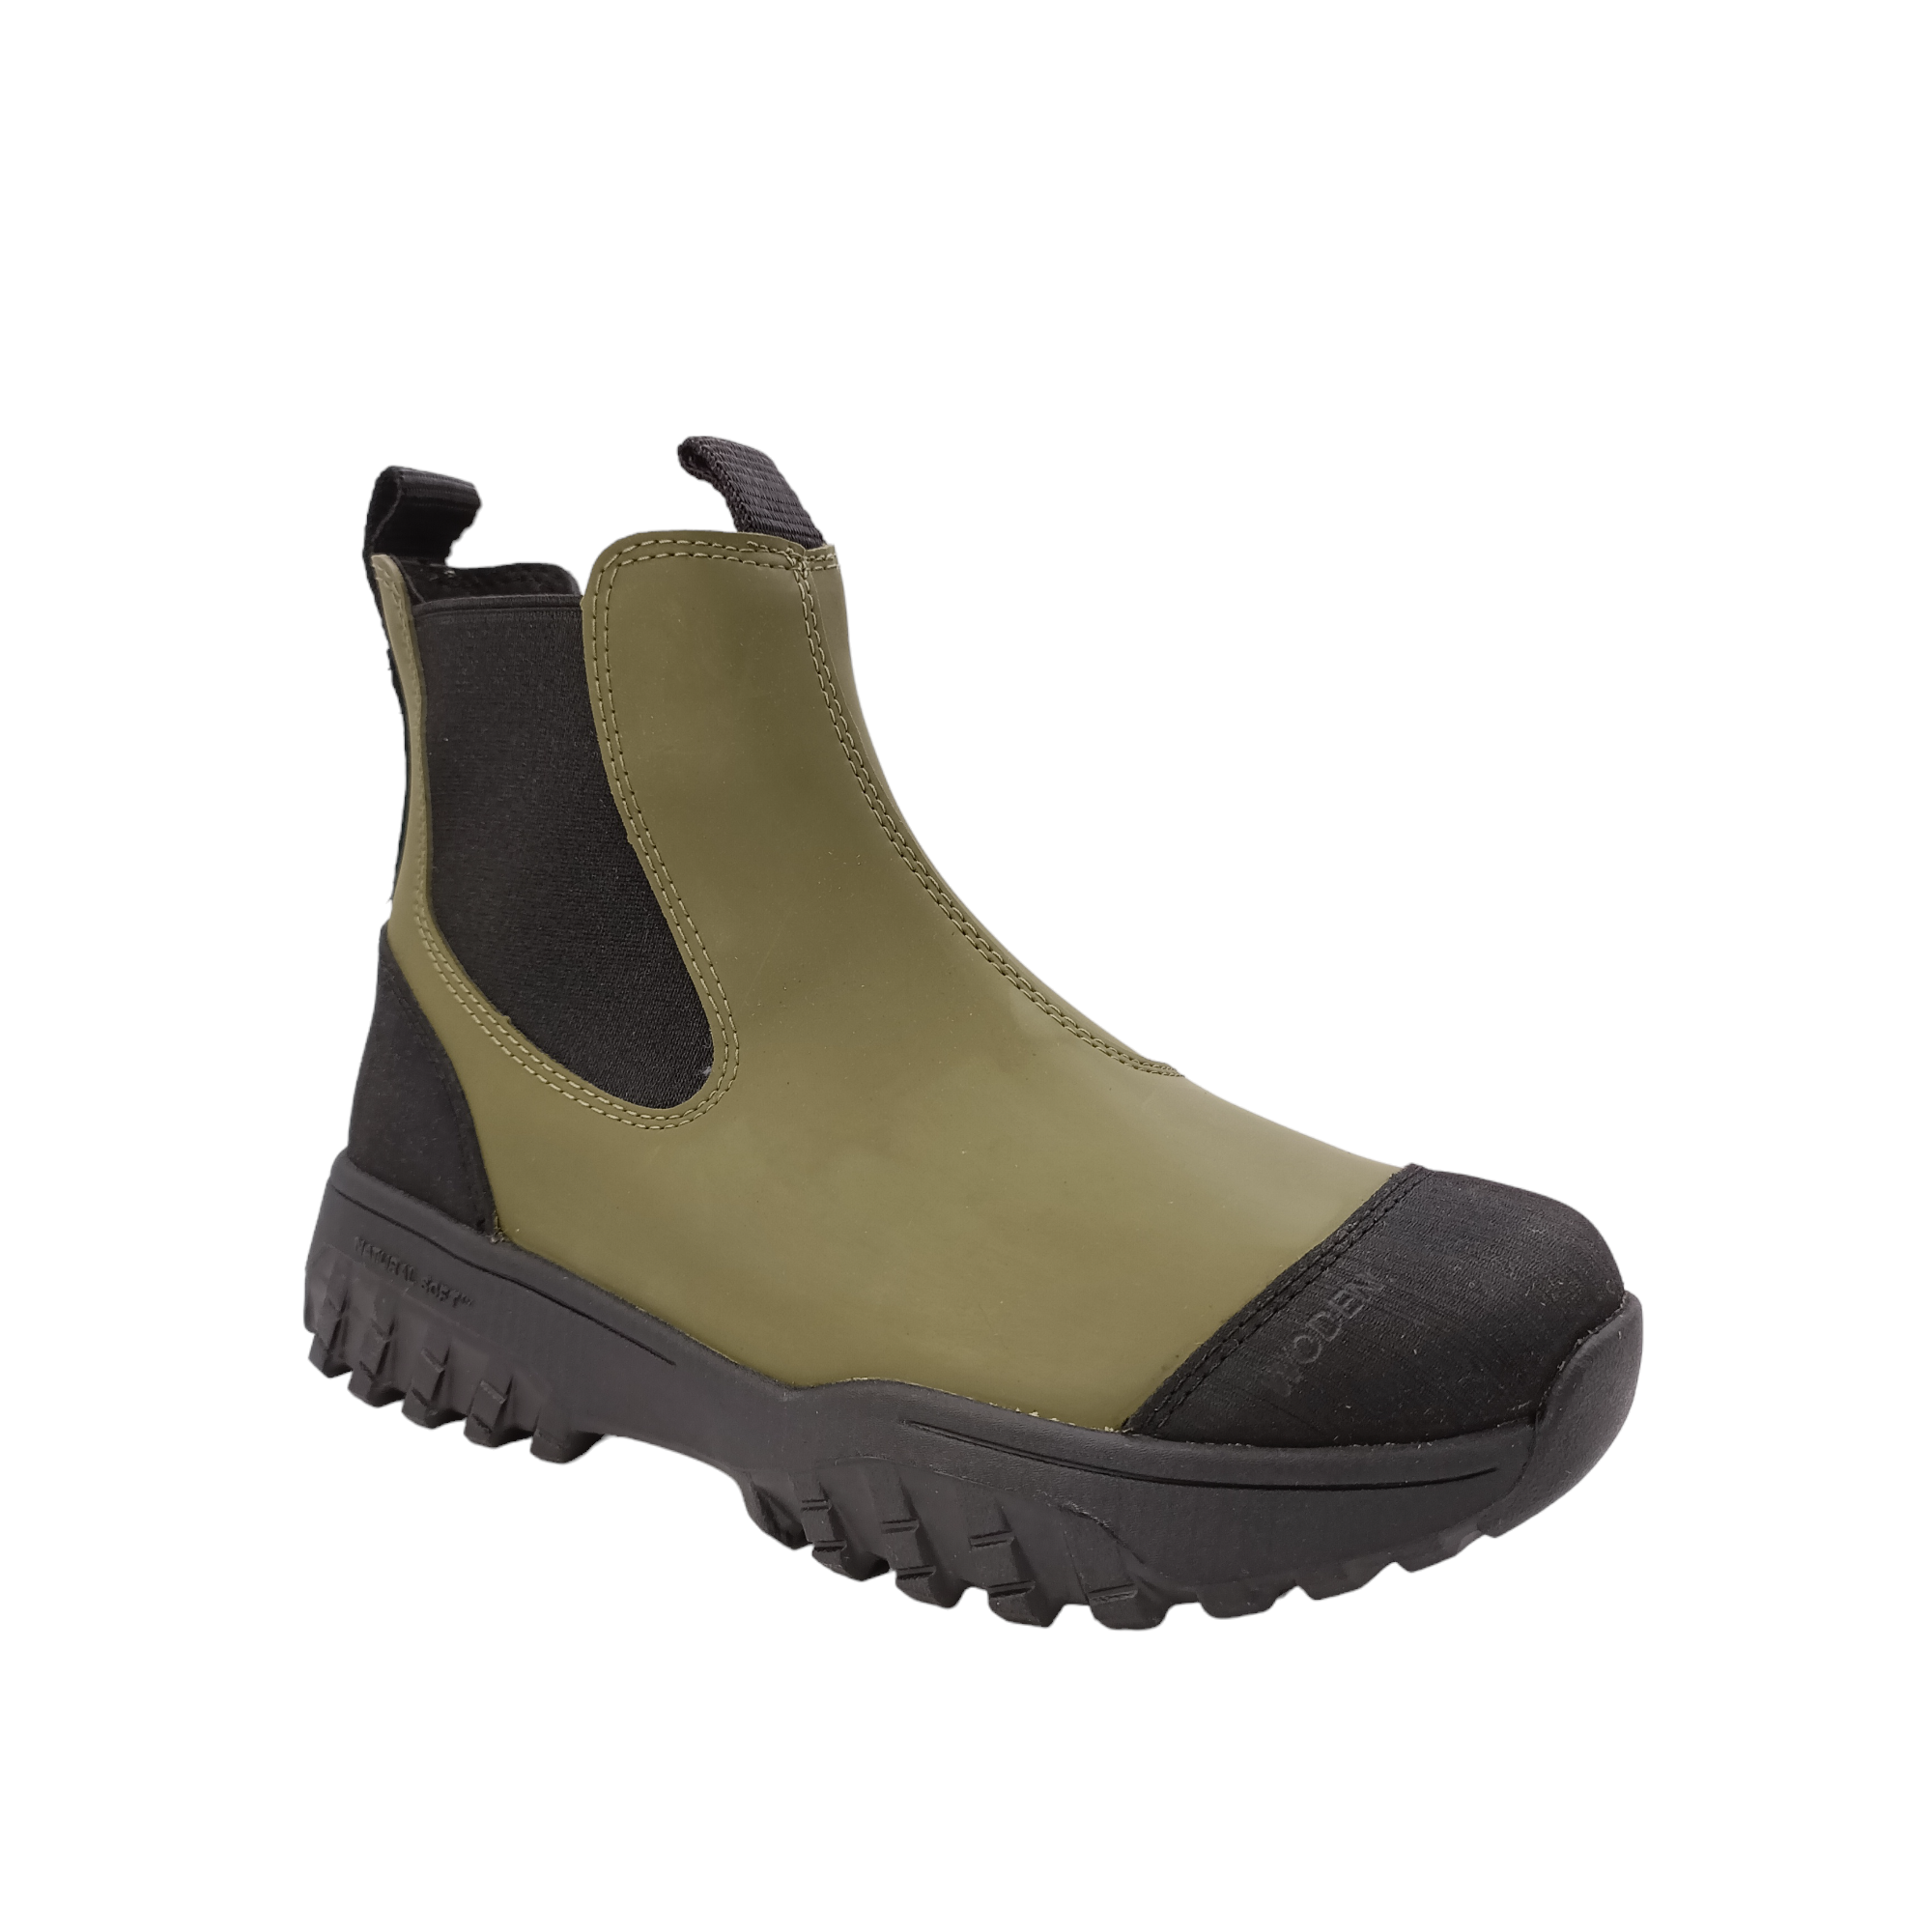 Shop Magda Waterproof Woden - with shoe&amp;me - from Woden - Boots - boots, Winter, Womens - [collection]